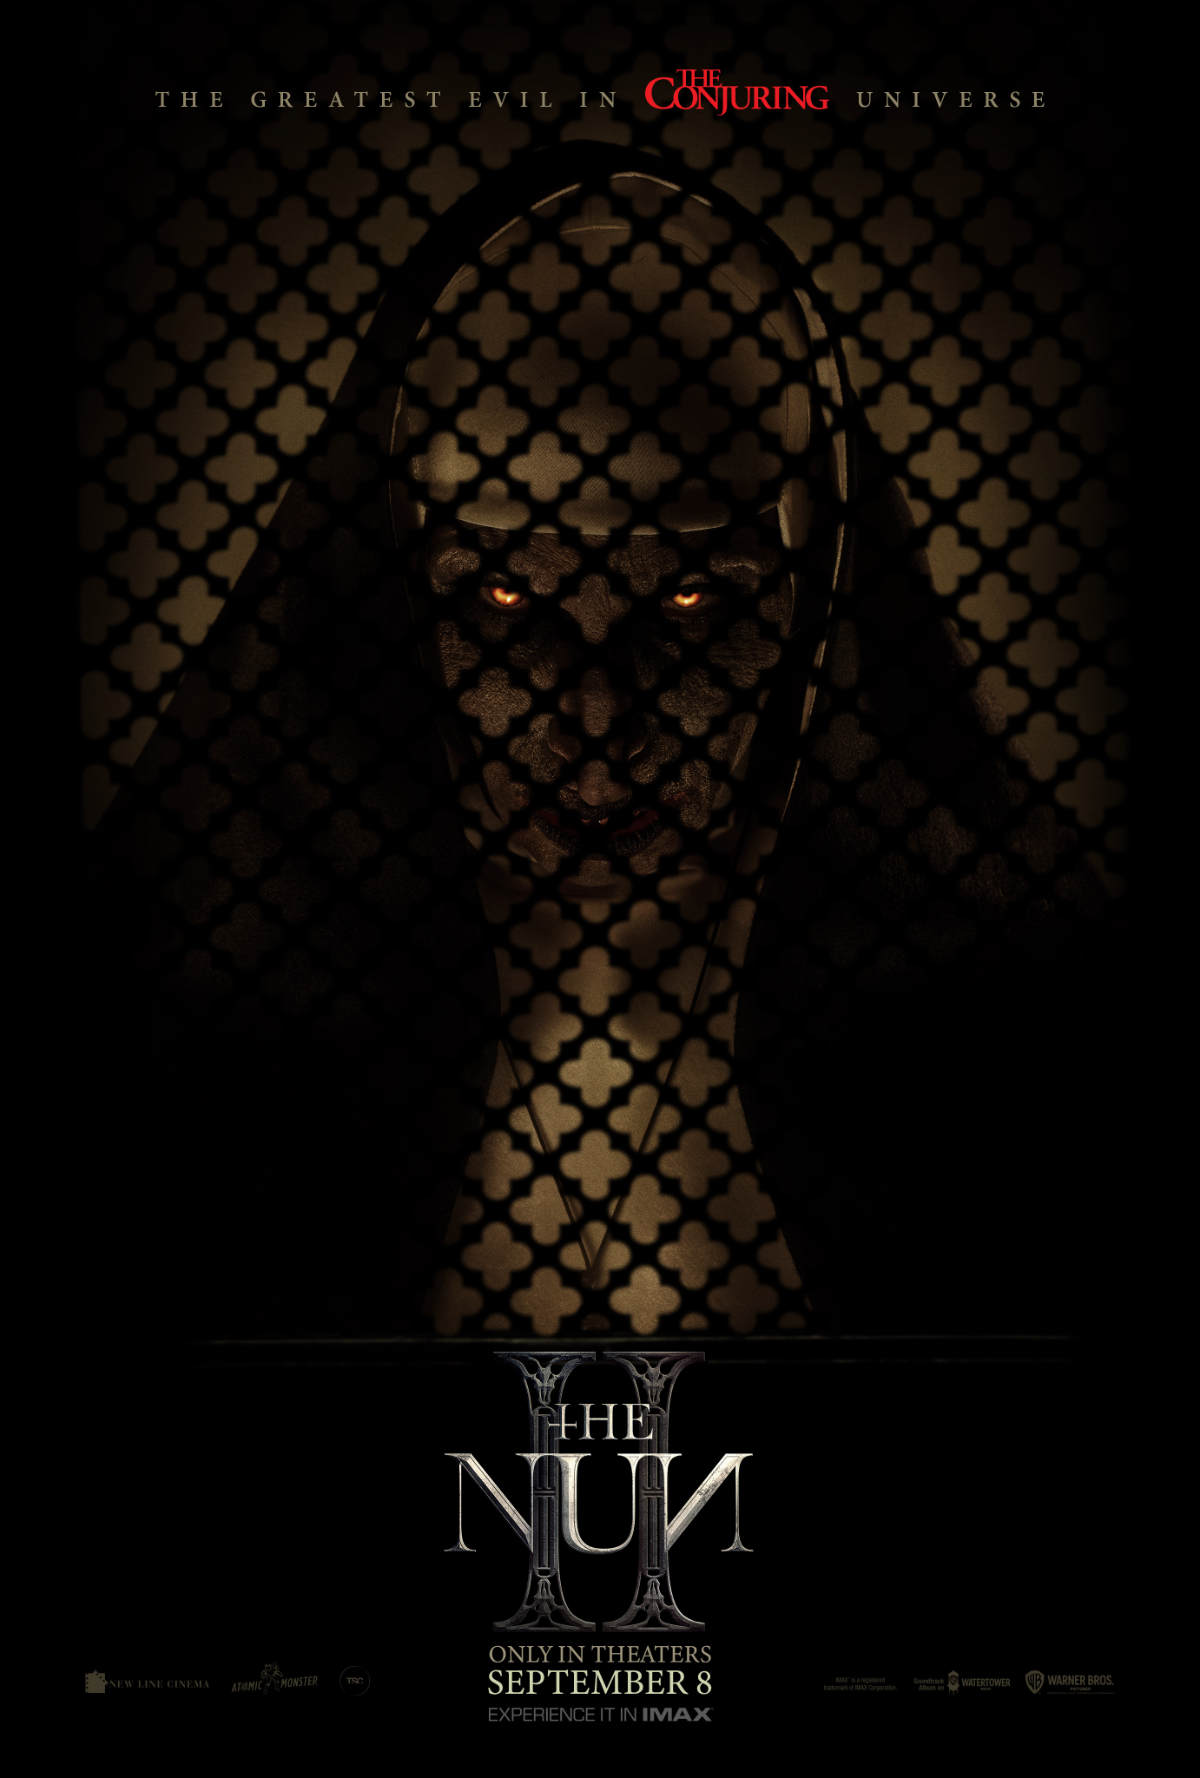 The Nun II Trailer and Poster Appear